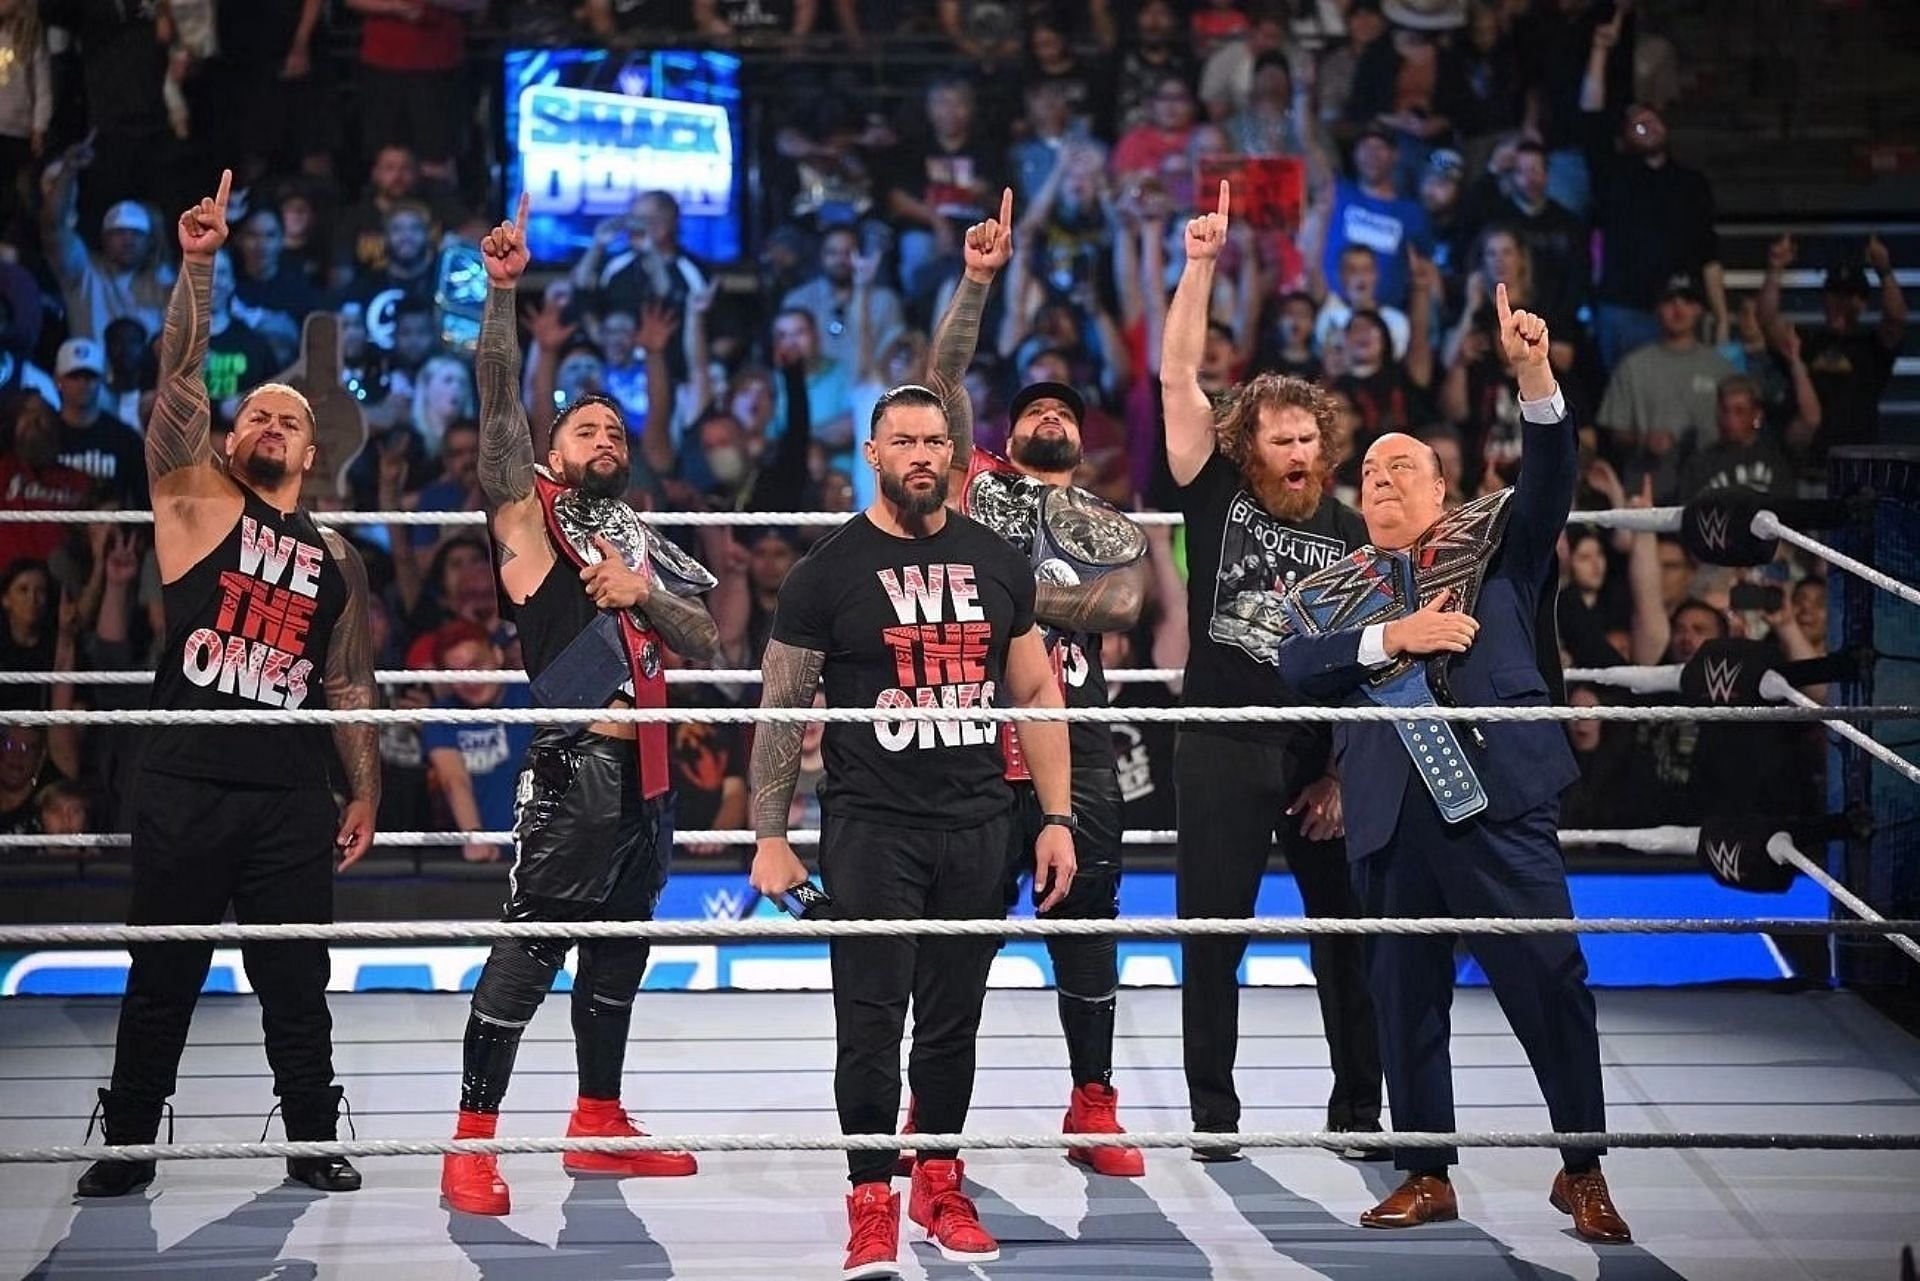 The Bloodline delivered another show stealing segment on SmackDown this week